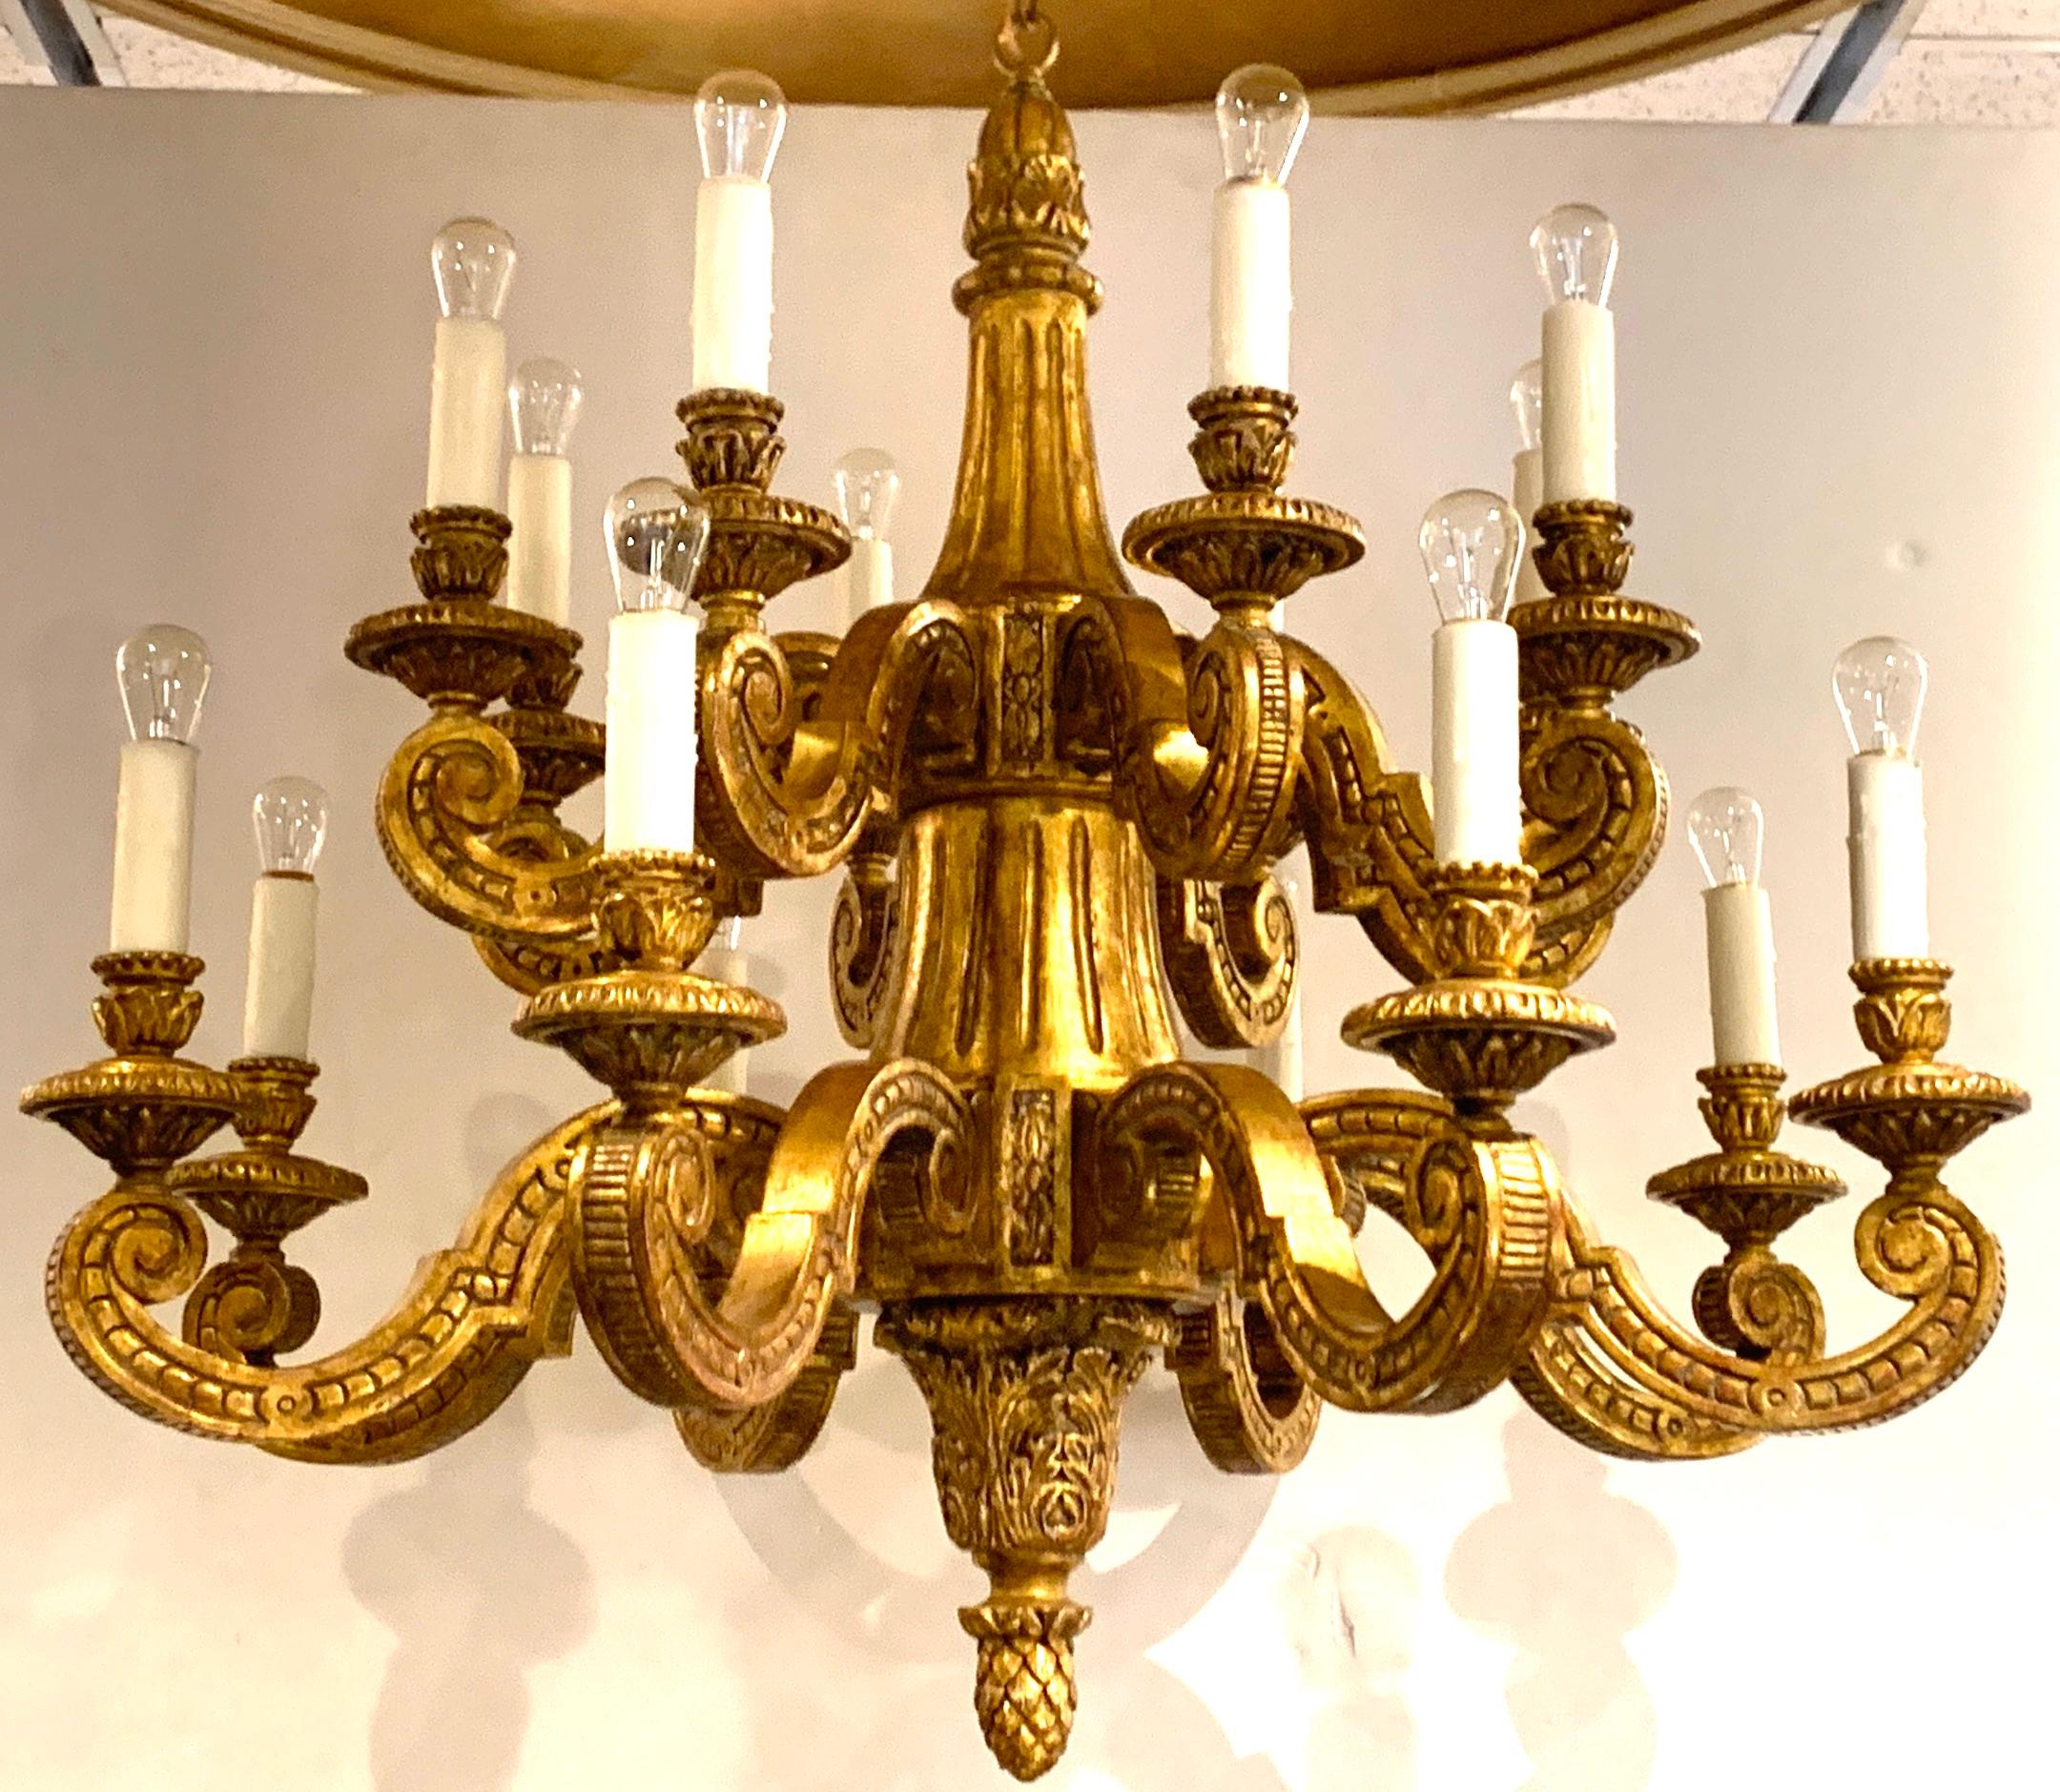 Regence style carved giltwood chandelier, 18 lights, two tiers nicely carved with fine details, fitted with 18 standard bulbs

Measures: 36